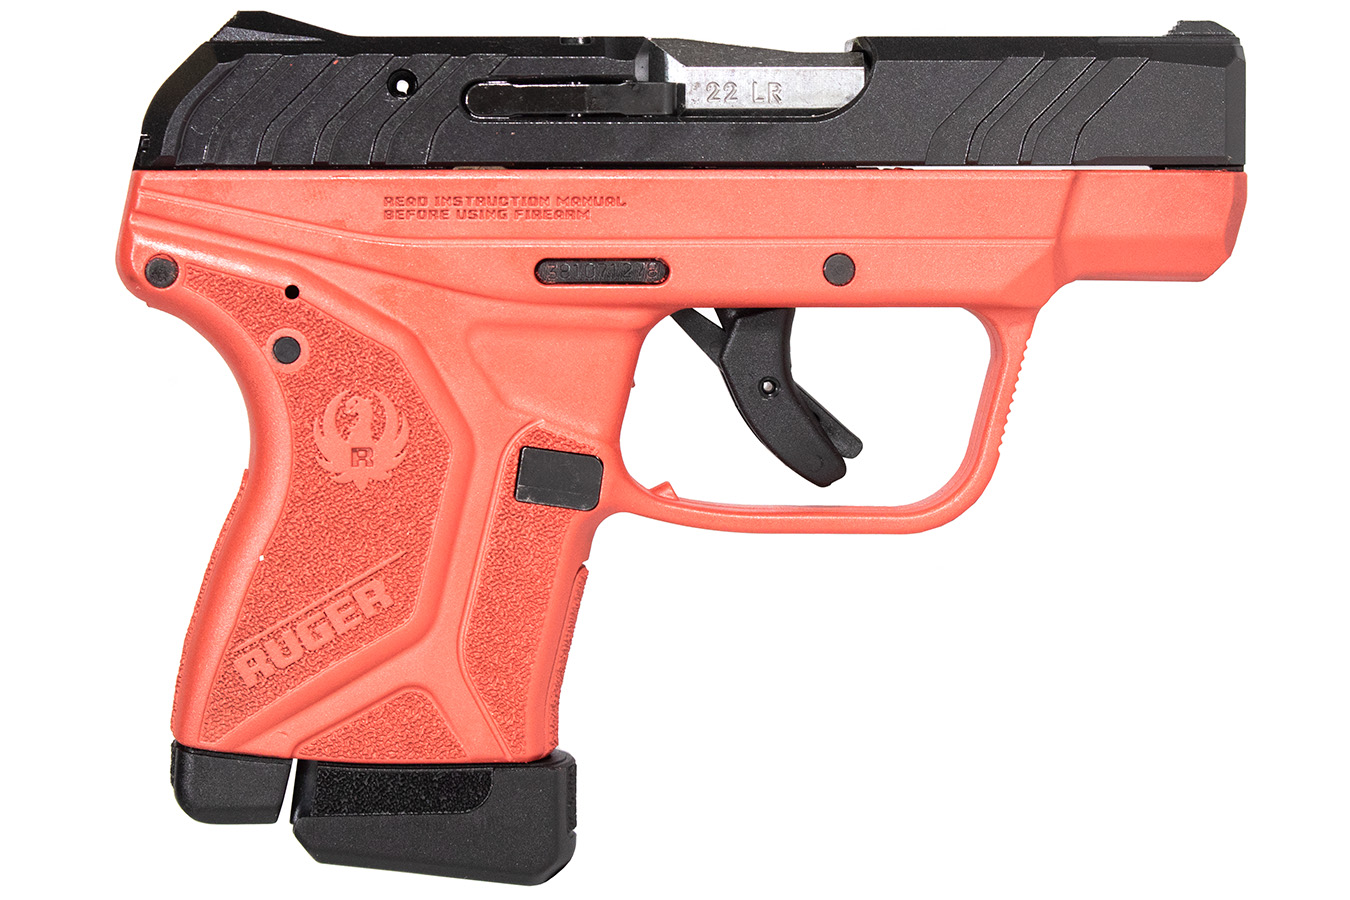 Ruger Lcp Ii 22lr Pistol With 275 Inch Barrel And Red Cerakote Frame Vance Outdoors 7824